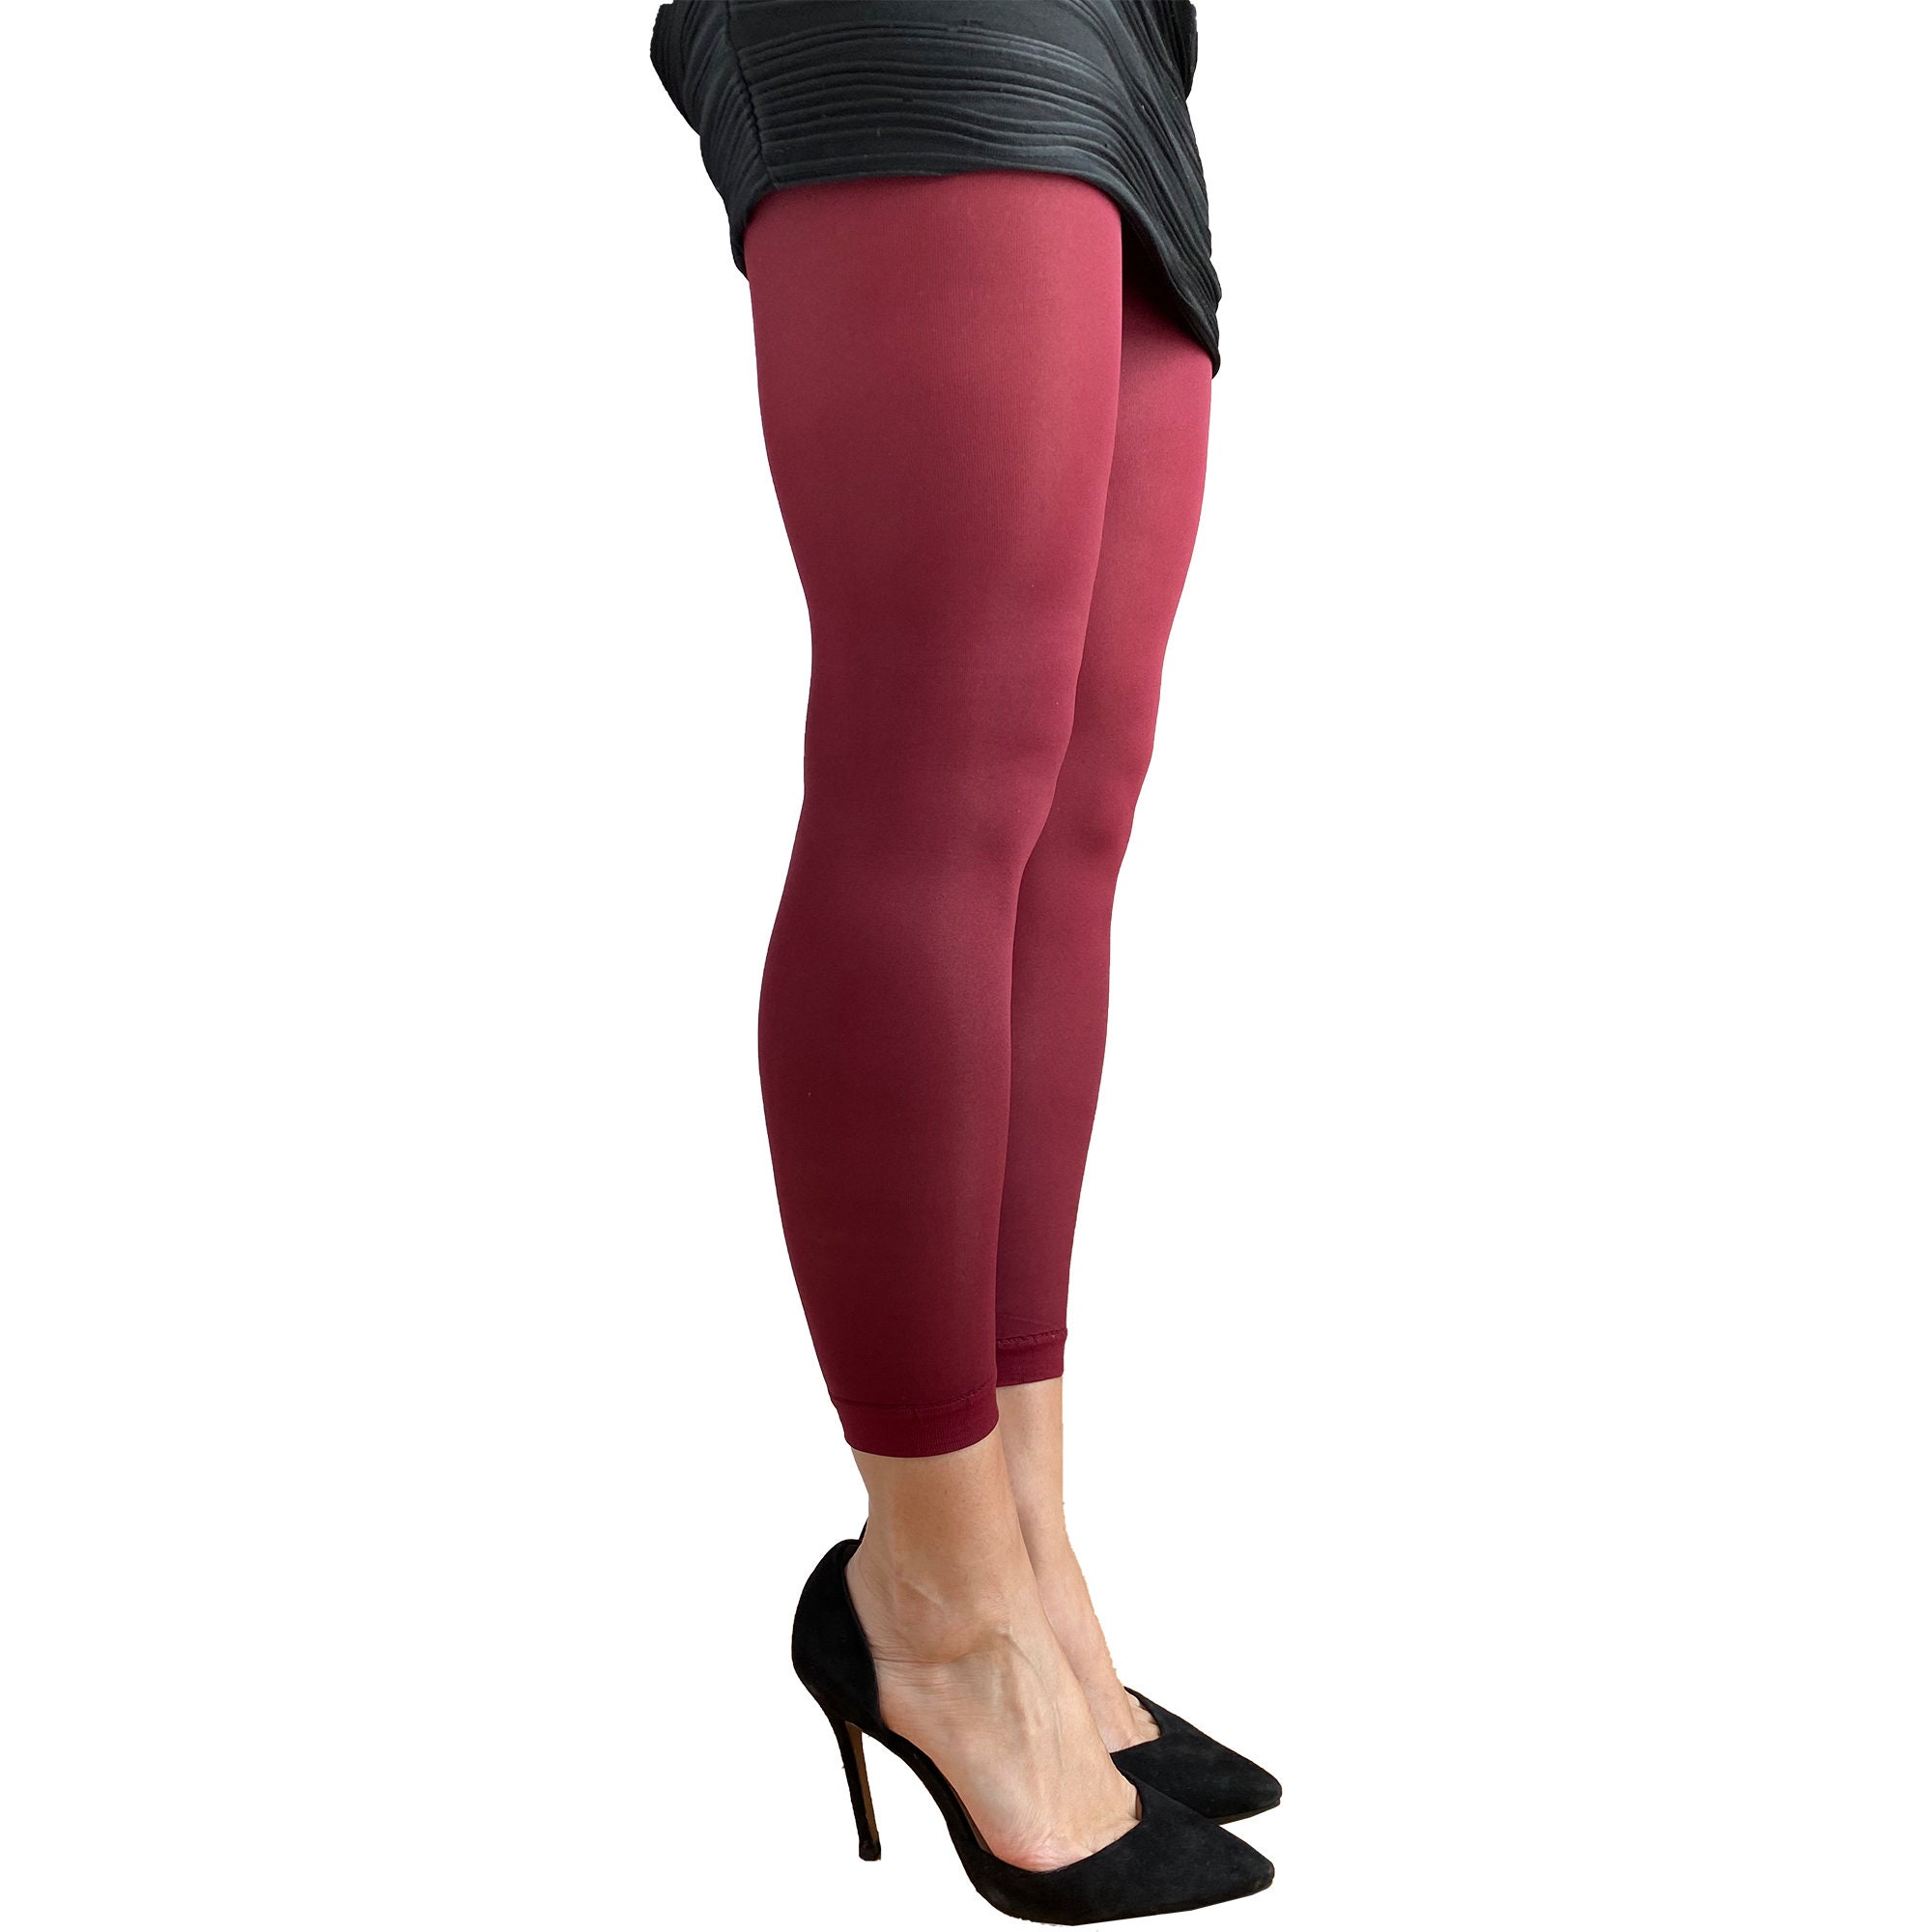 Buy Burgundy Footless Tights for Women Ankle Length Pantyhose Plus